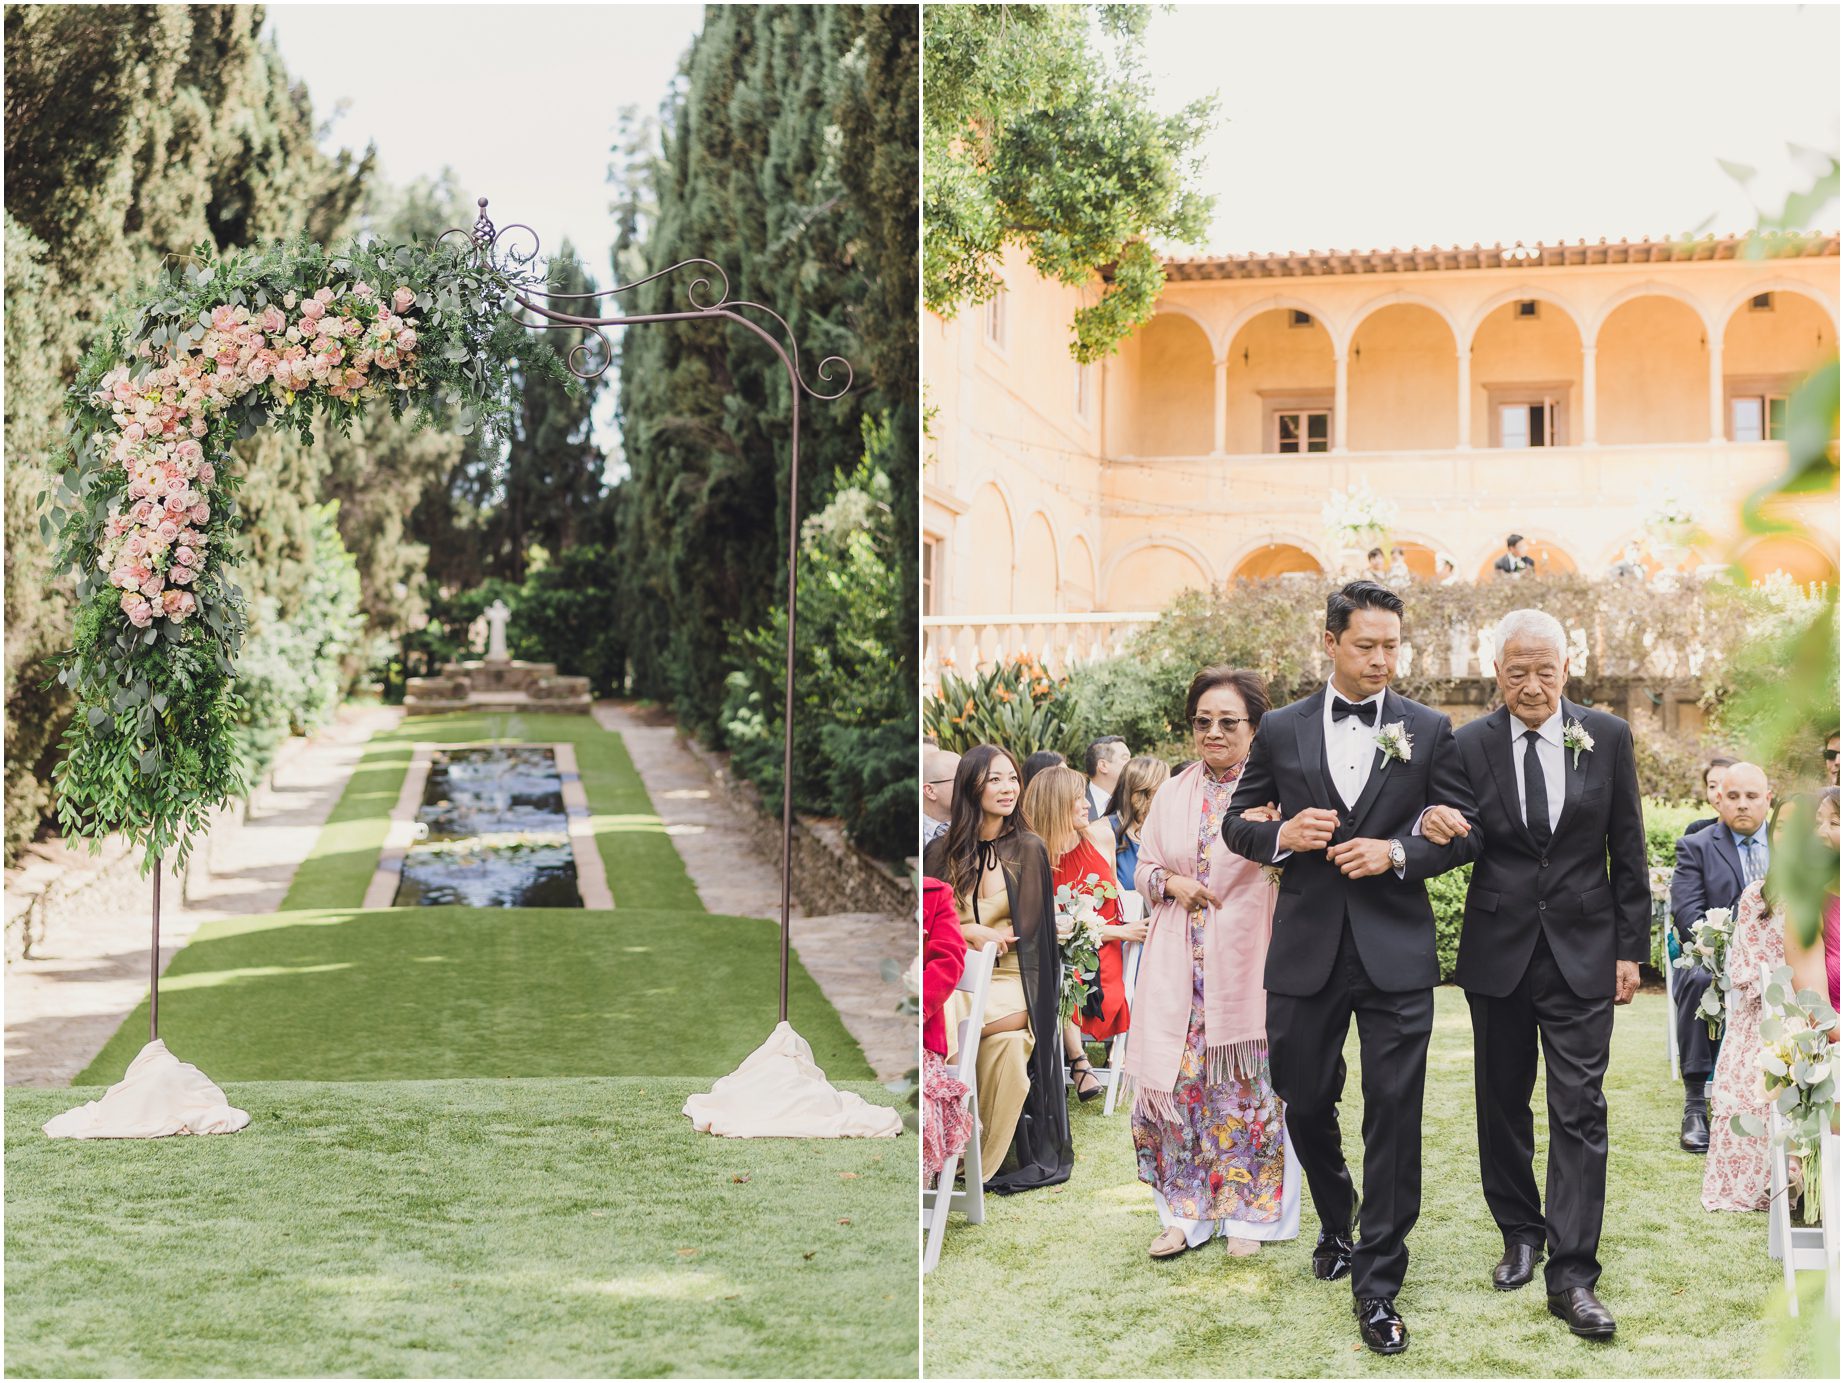 groom walks dow the aisle with his parents. In the photograph on the left we see an arch with flowers framing a pond